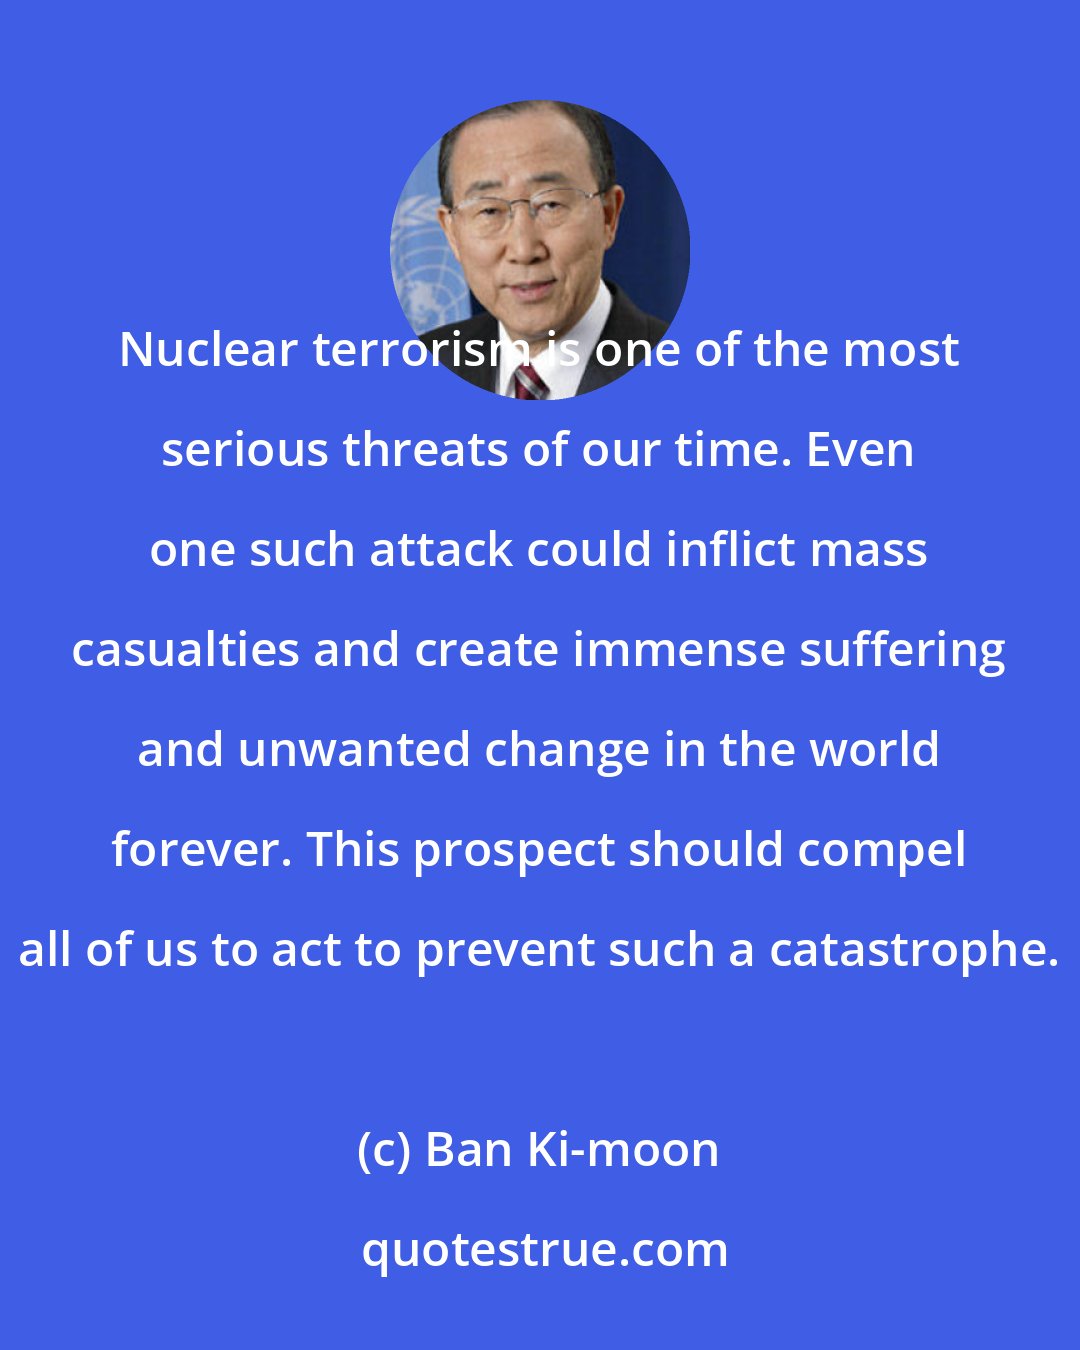 Ban Ki-moon: Nuclear terrorism is one of the most serious threats of our time. Even one such attack could inflict mass casualties and create immense suffering and unwanted change in the world forever. This prospect should compel all of us to act to prevent such a catastrophe.